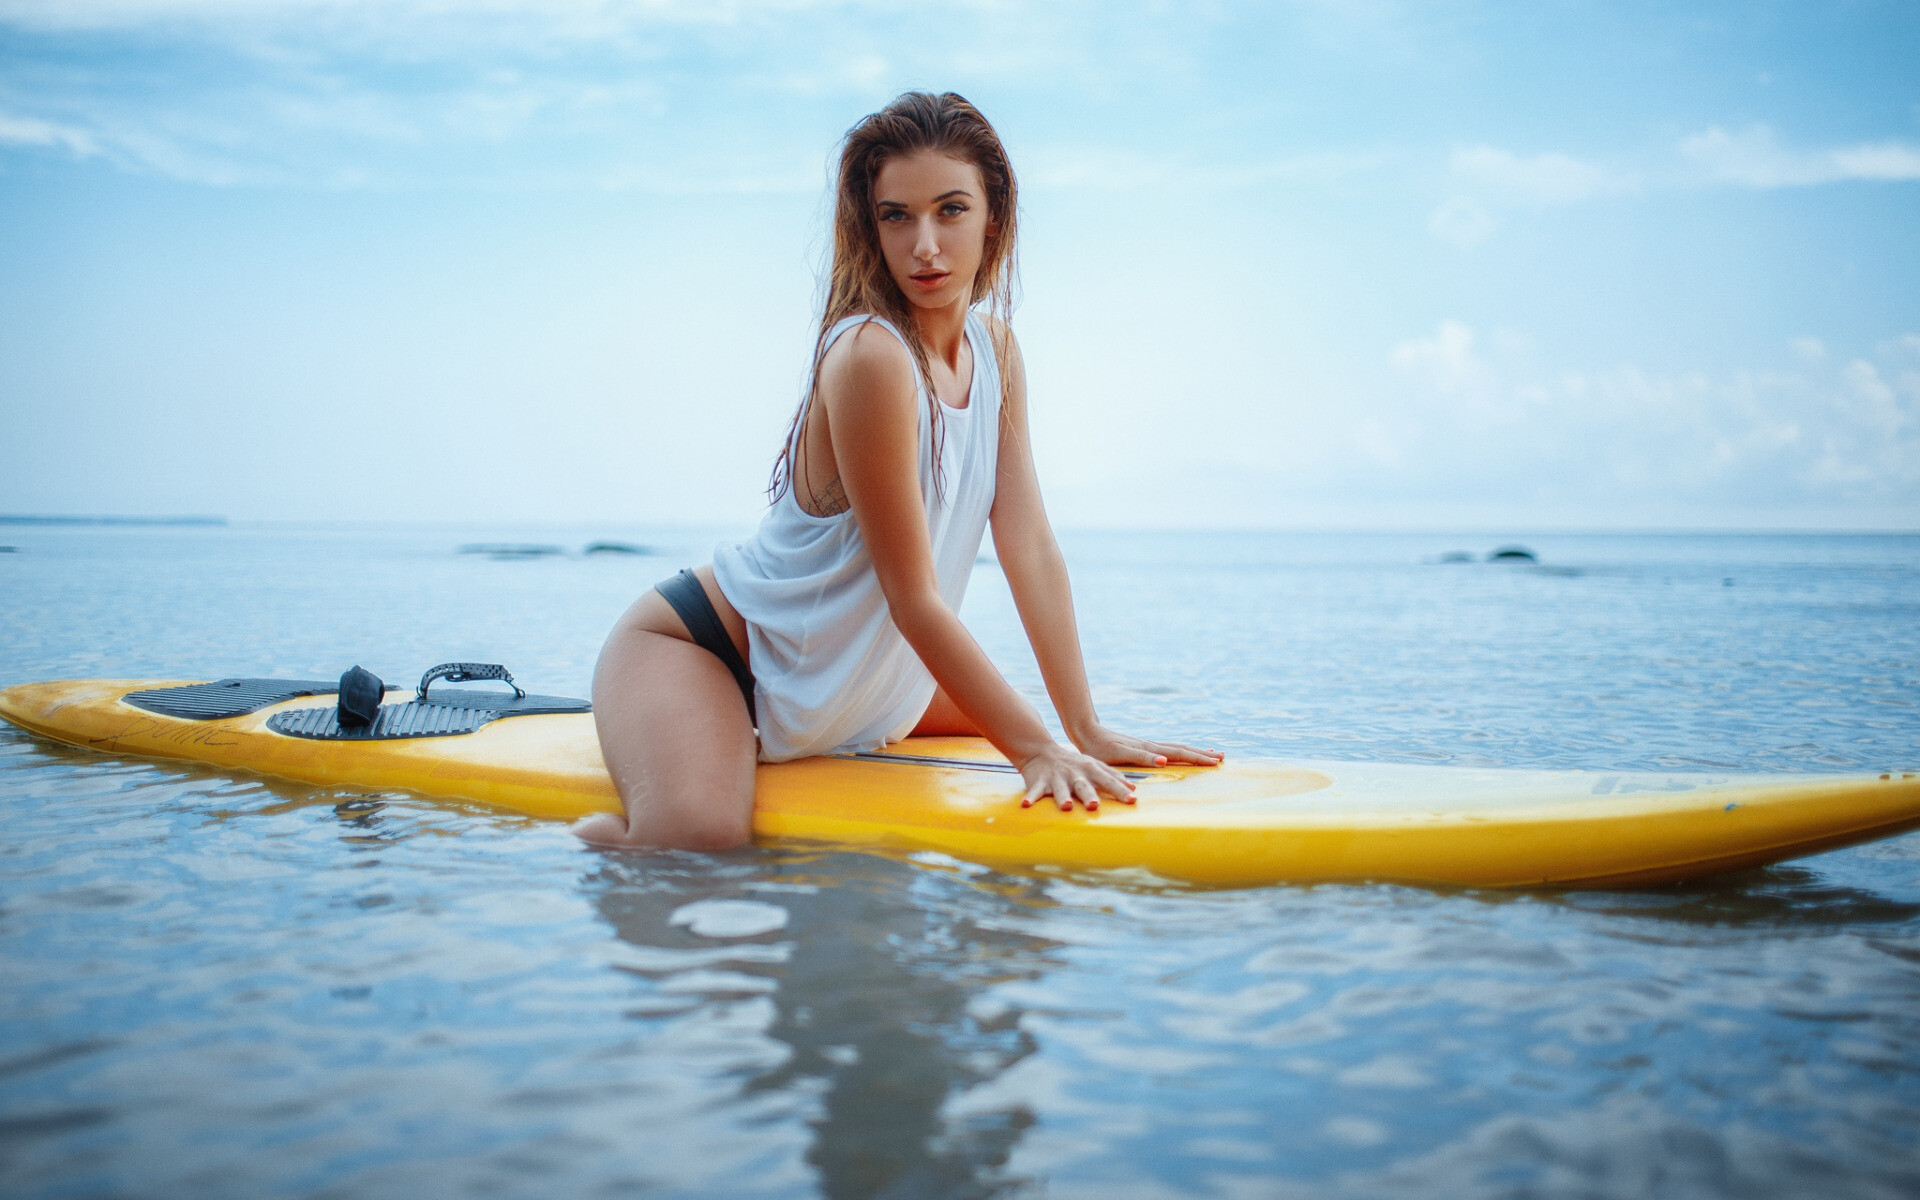 Girl Surfing: Recreational water sports, Longboarding style, Beaches on the Caribbean coast. 1920x1200 HD Wallpaper.